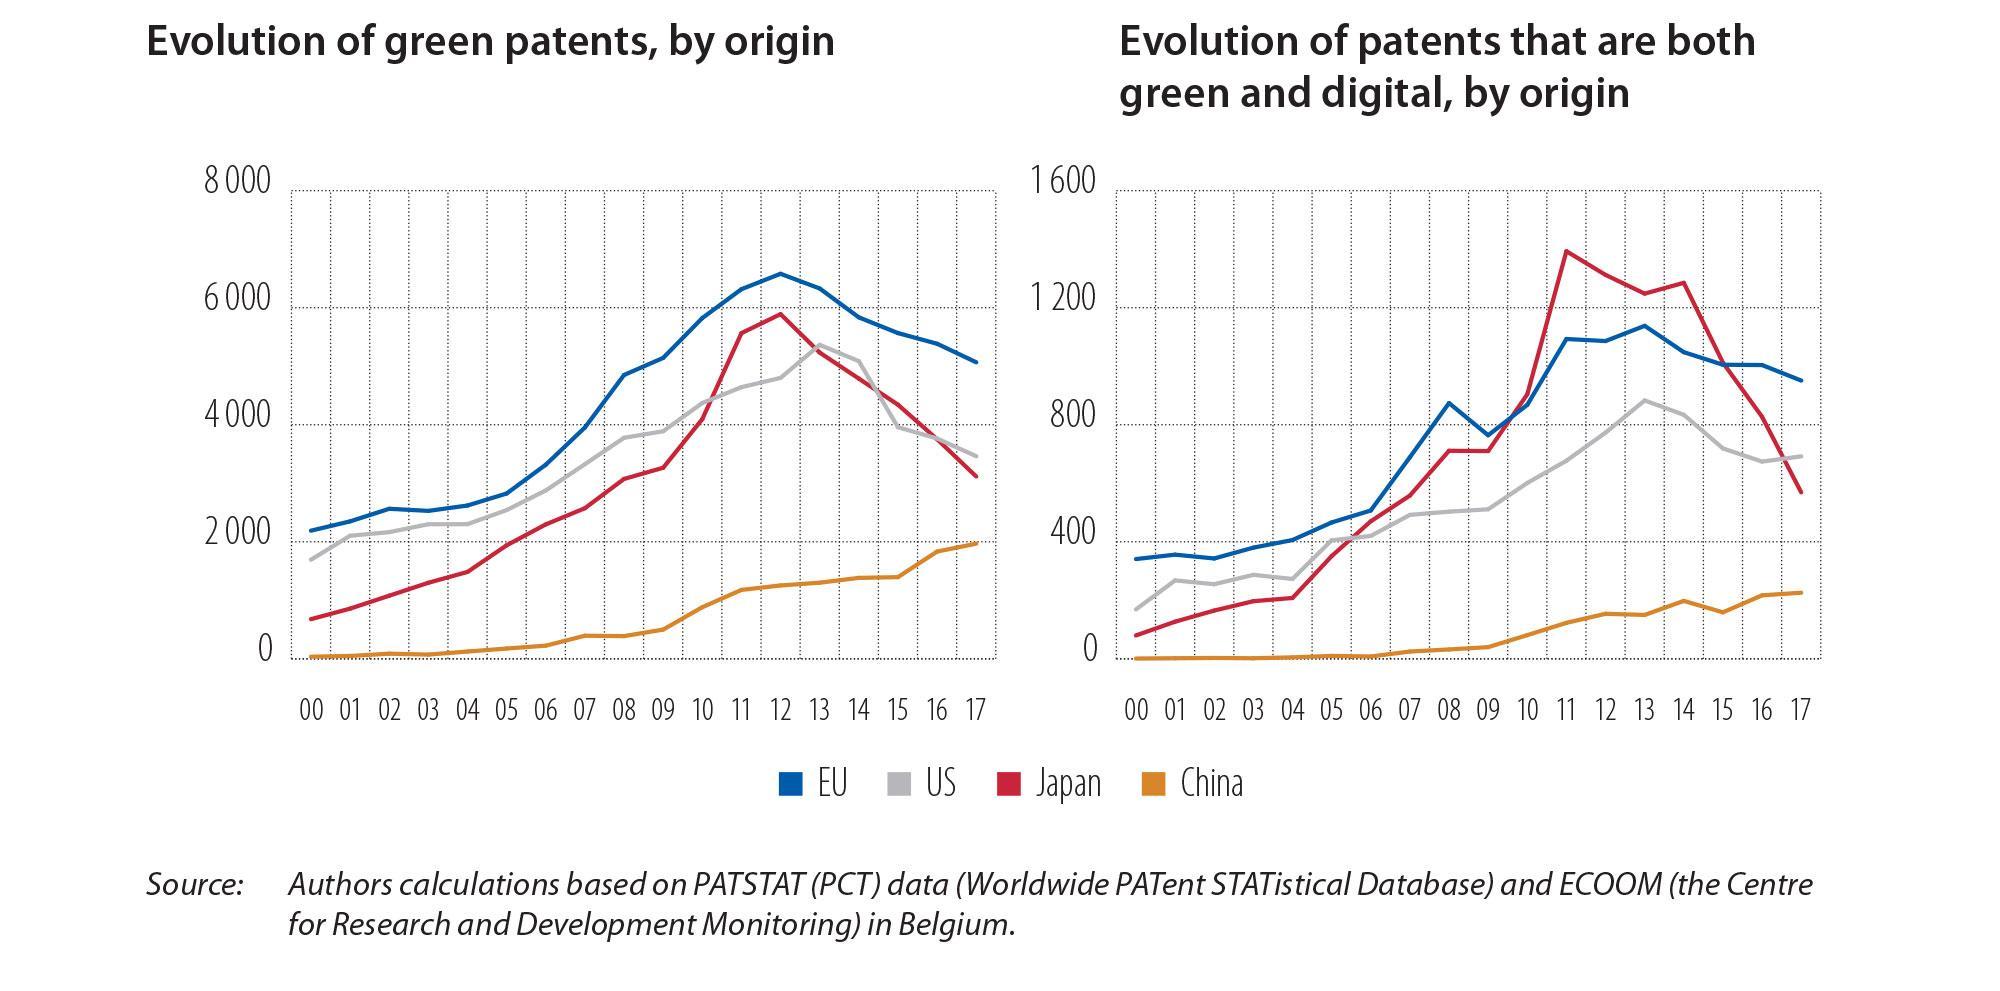 Evolution of green patents, by origin / Evolution of patents that are both green and digital, by origin